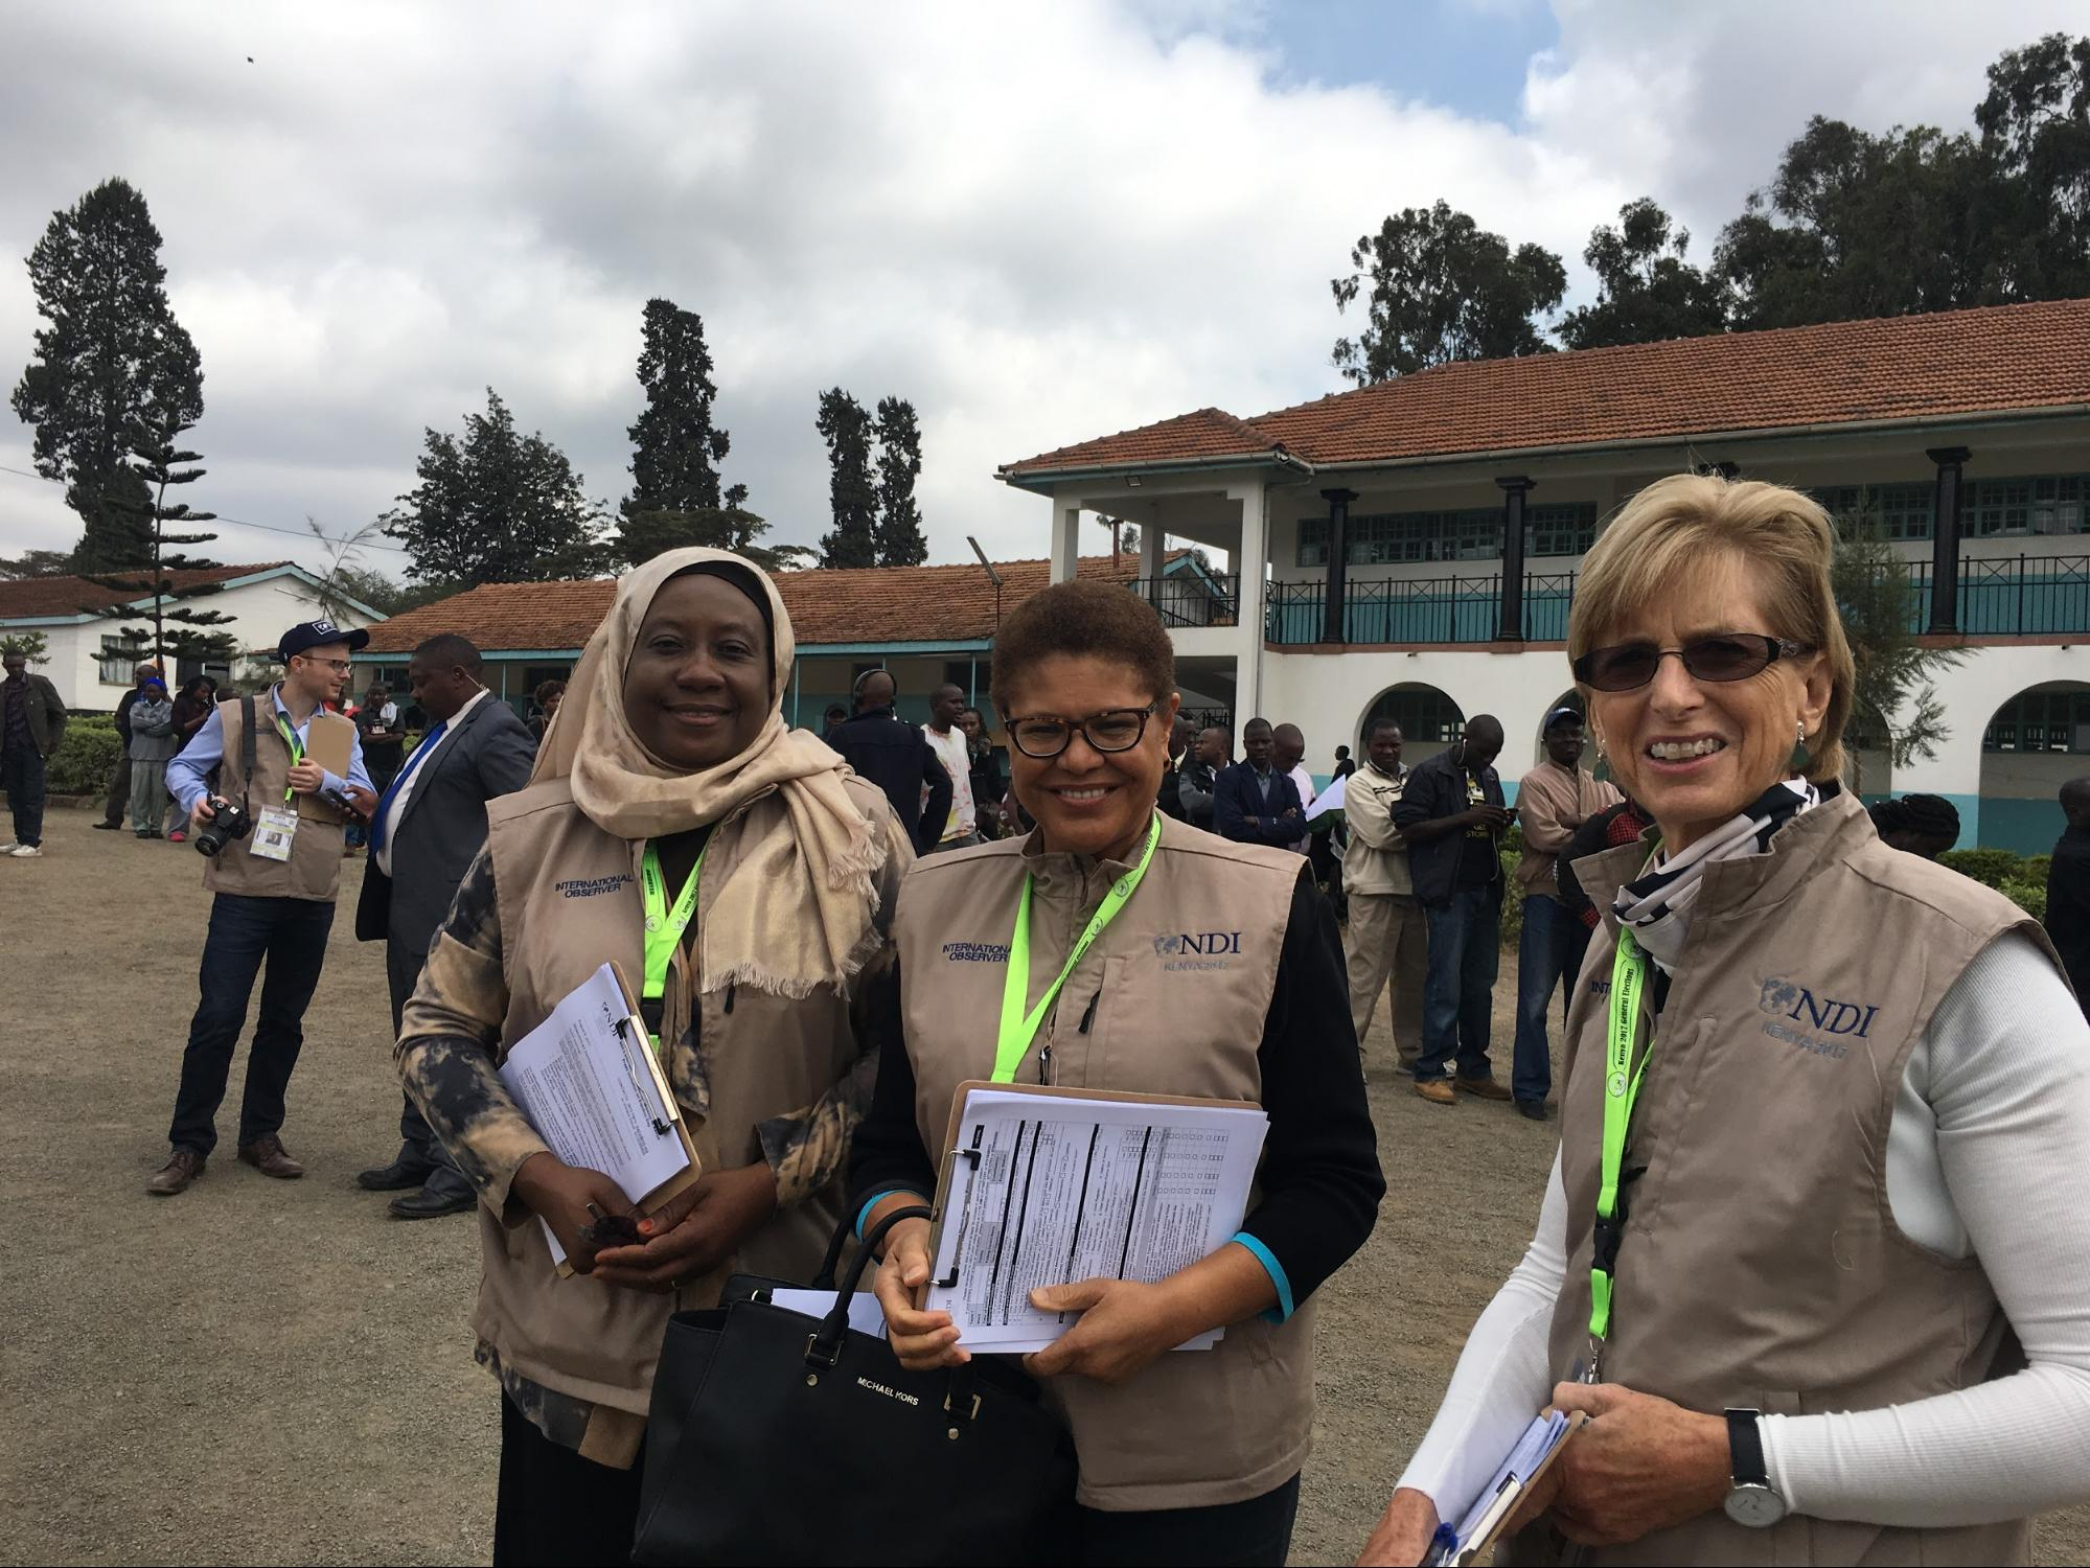 Ambassador Abdullahi, Rep. Bass, and former Governor Whitman have their observer vests and checklists at hand on Election Day.